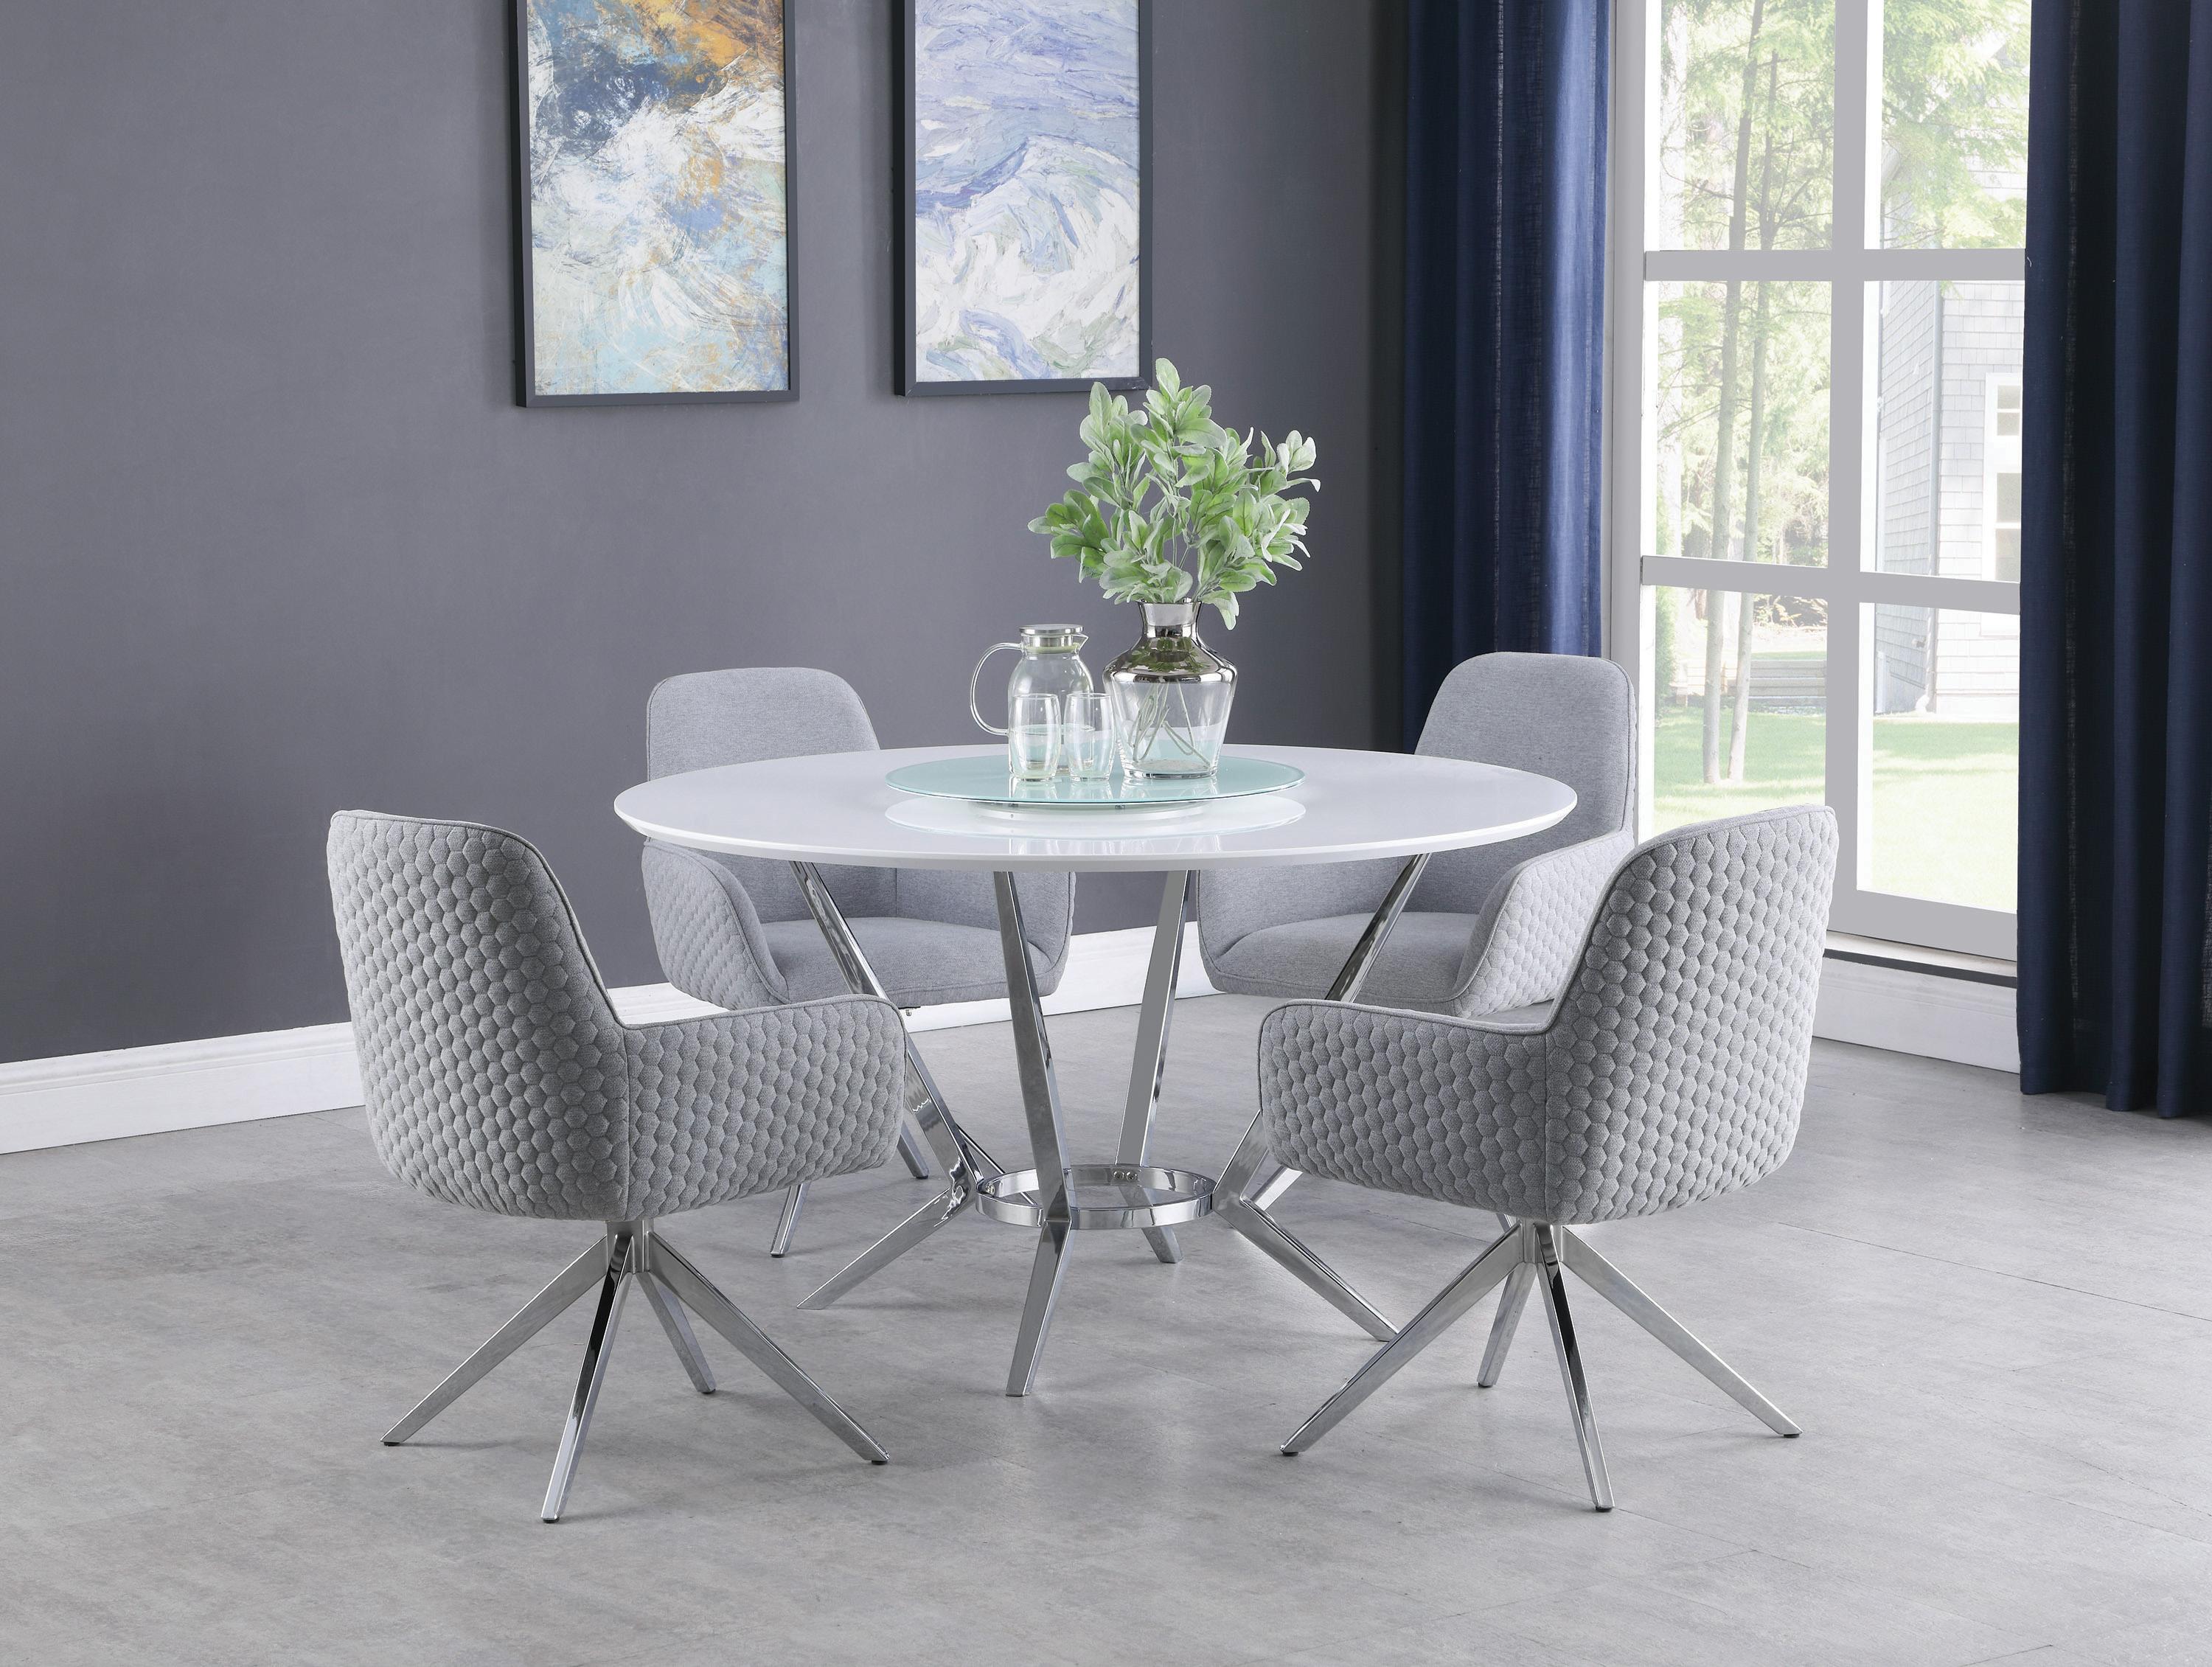 Contemporary Dining Room Set 110321-S5 Abby 110321-S5 in Chrome Fabric